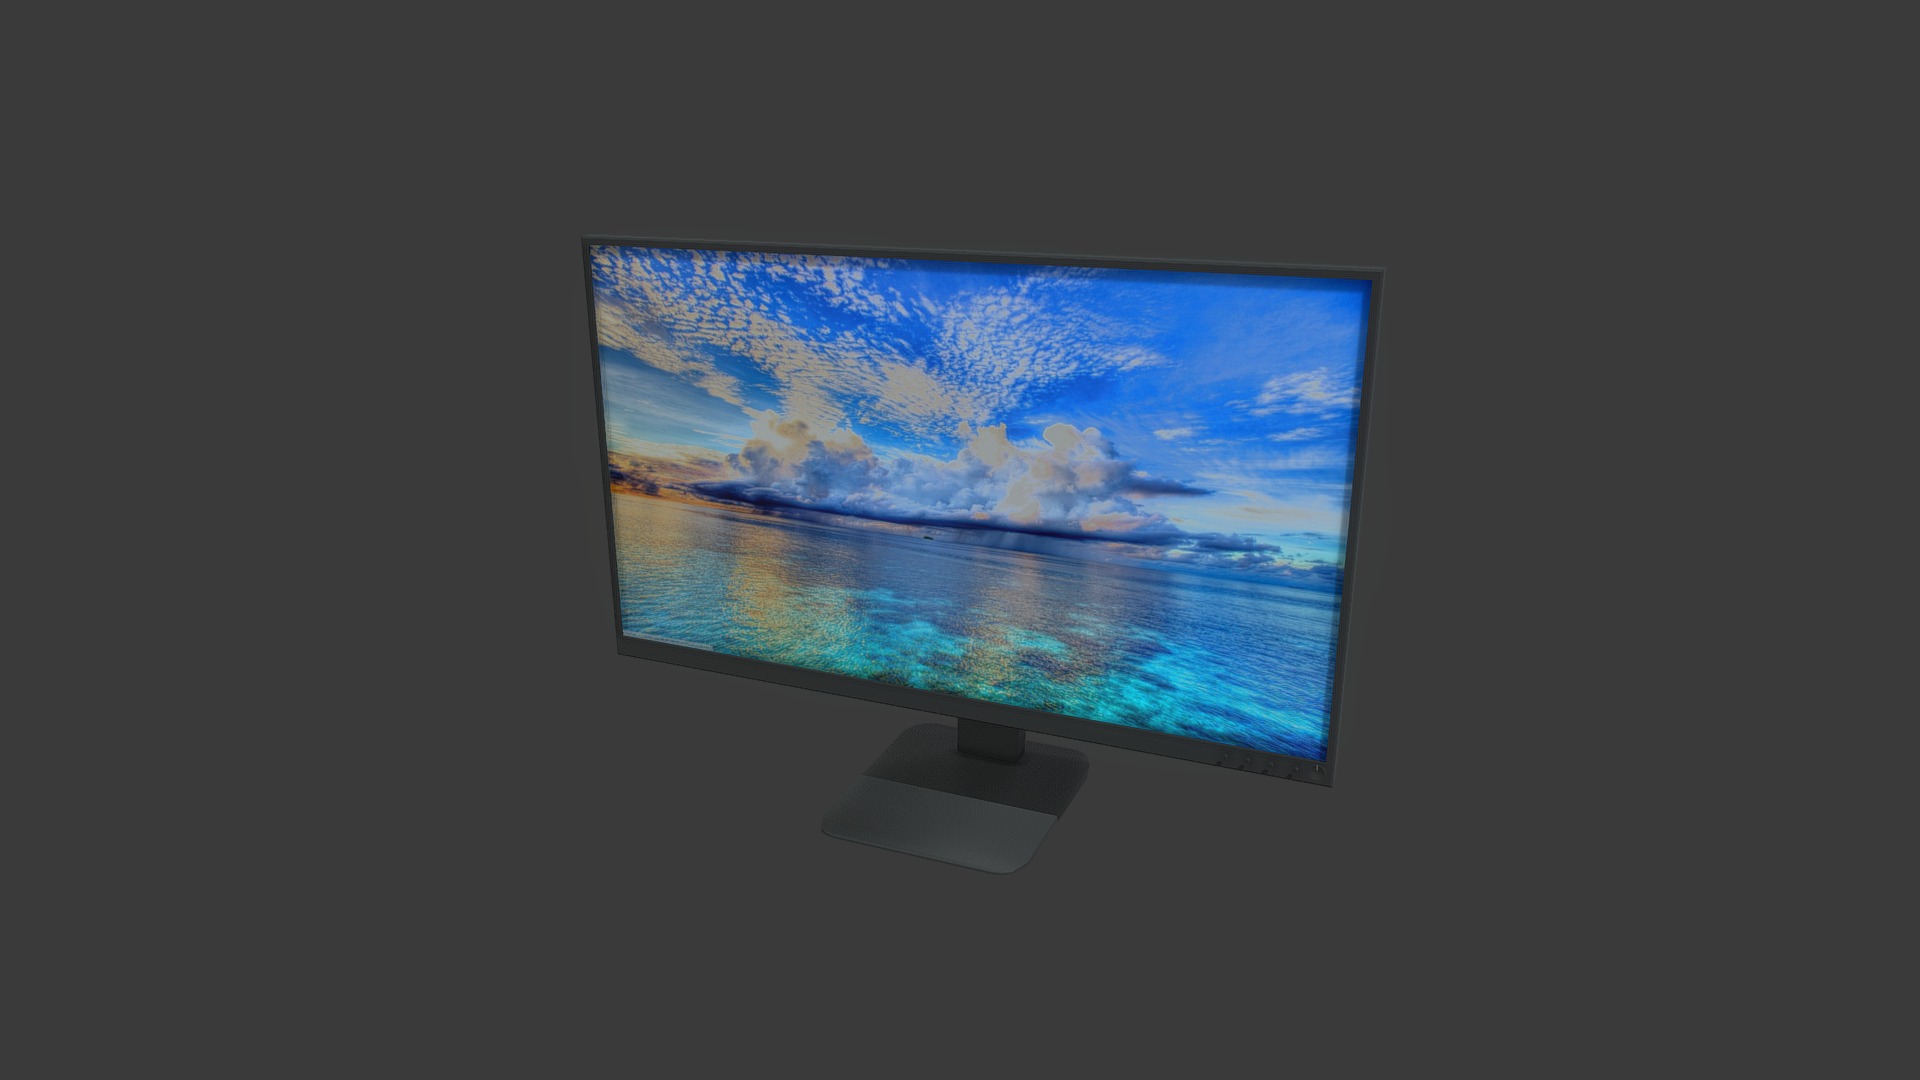 3D model DELL SE2416H 23.8 monitor - This is a 3D model of the DELL SE2416H 23.8 monitor. The 3D model is about a computer monitor with a blue sky.